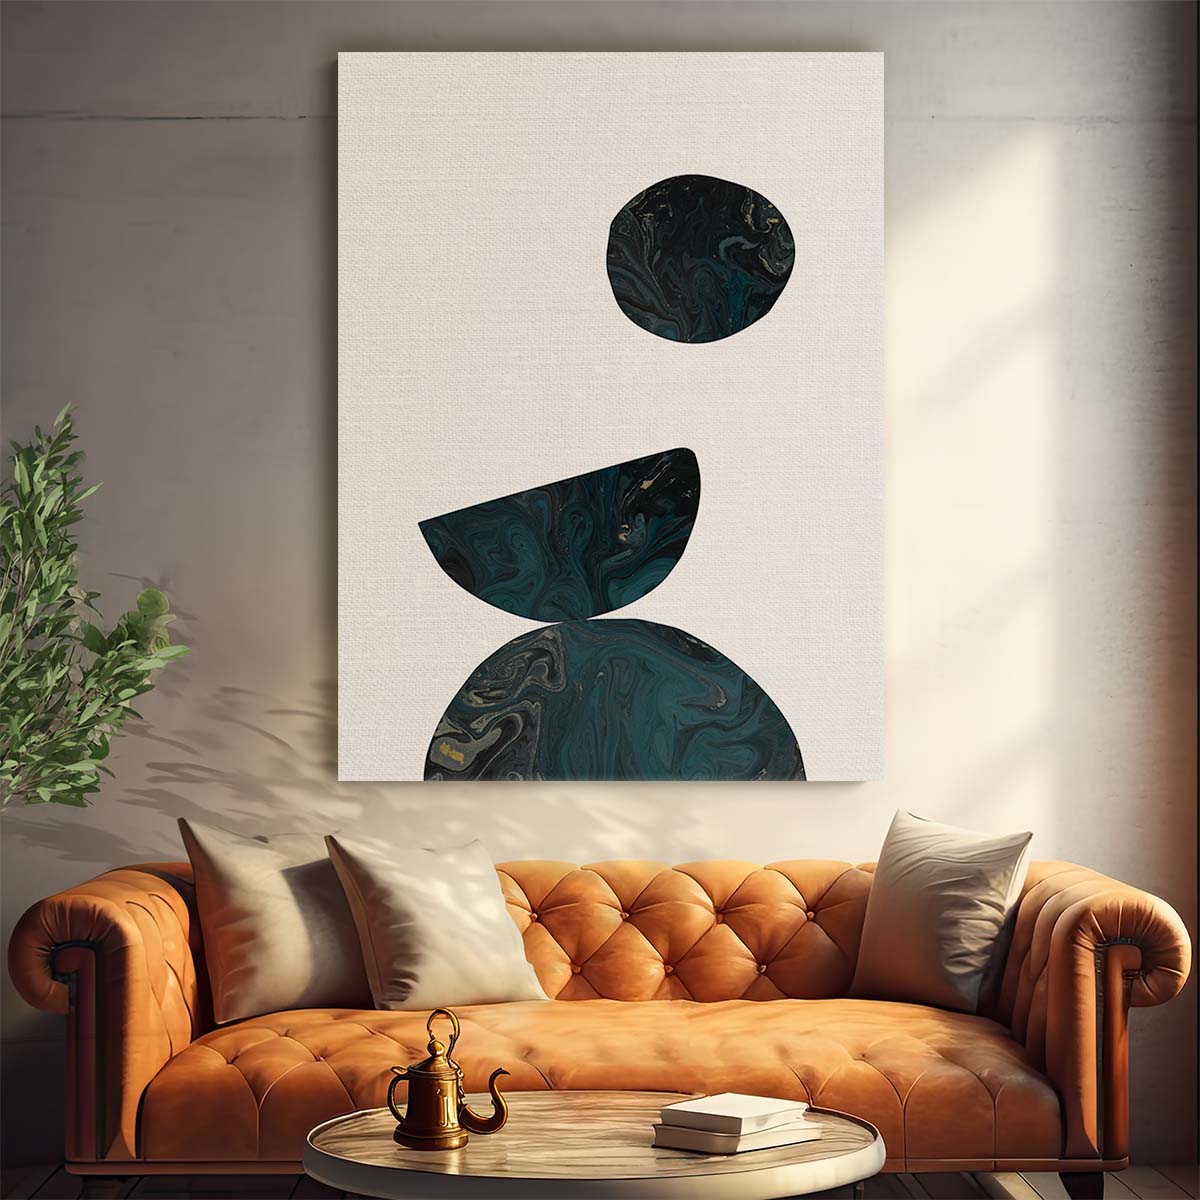 Mid-Century Minimalist Geometric Abstract Illustration Wall Art by Luxuriance Designs, made in USA